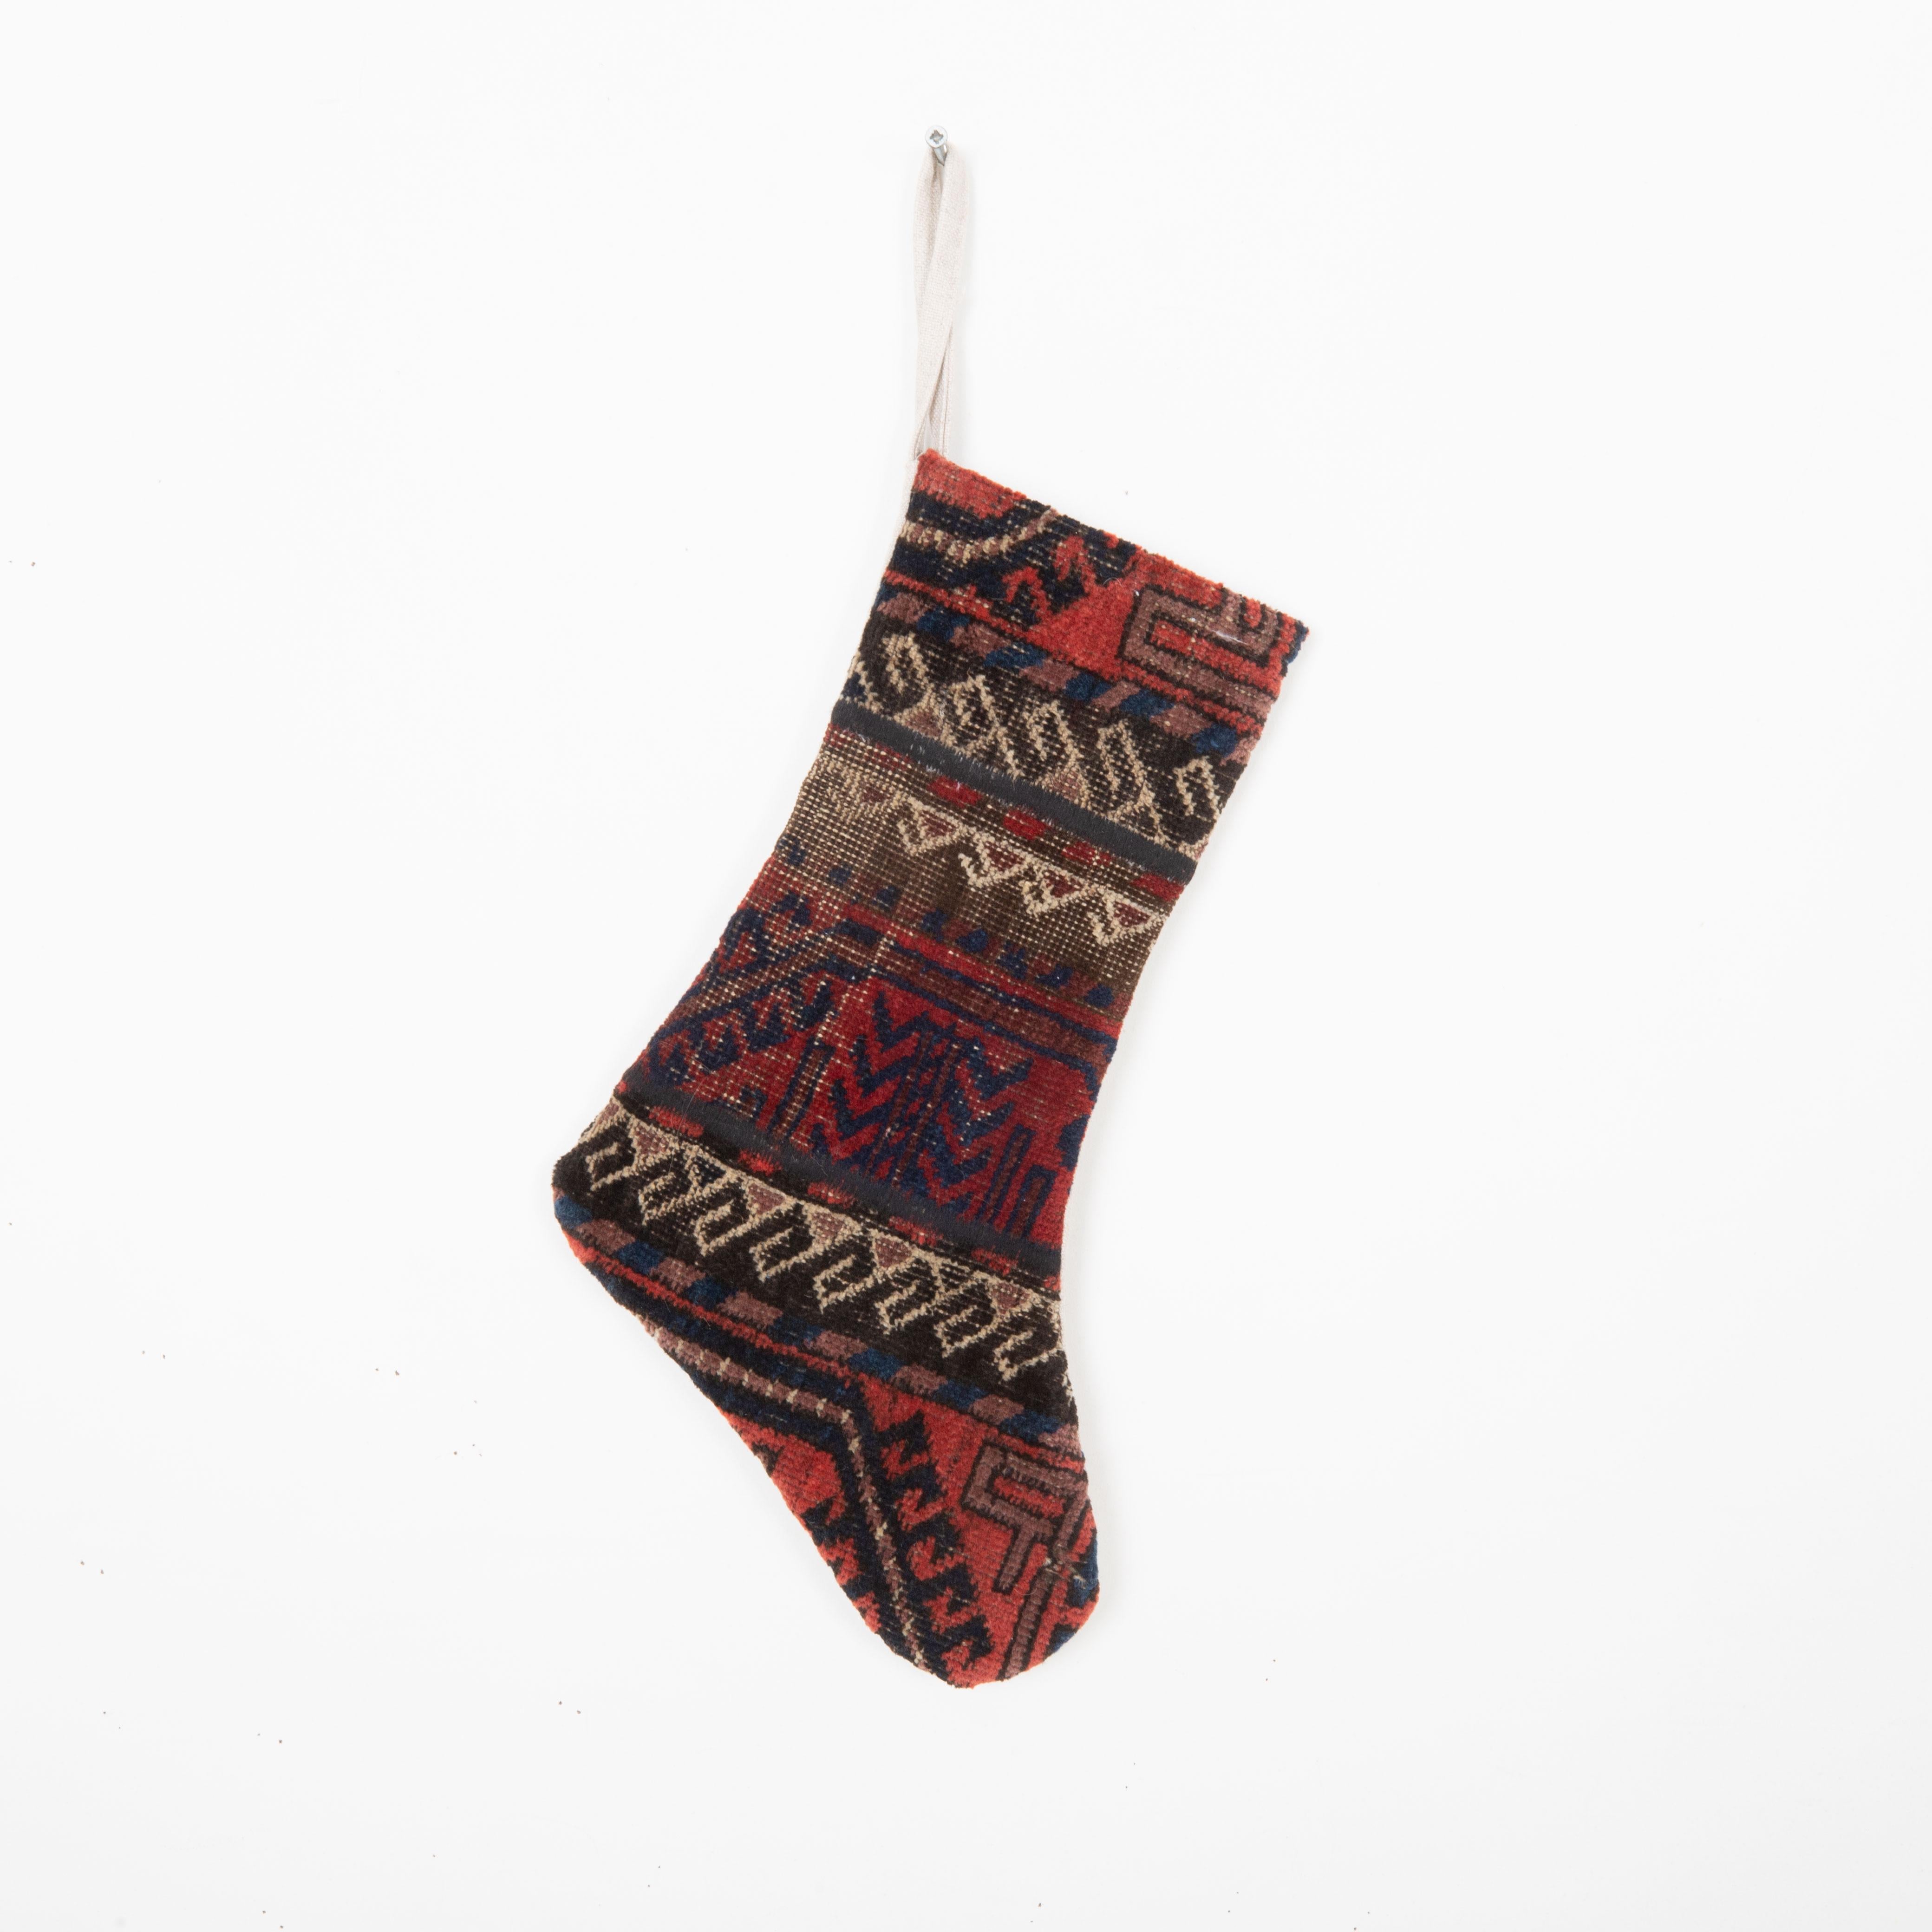 This Christmas Stocking was made from a late 19th or Early 20th C. Baluch rug fragments.
Linen in the back.

Please note, this stocking was made from Baluch rug fragments.
